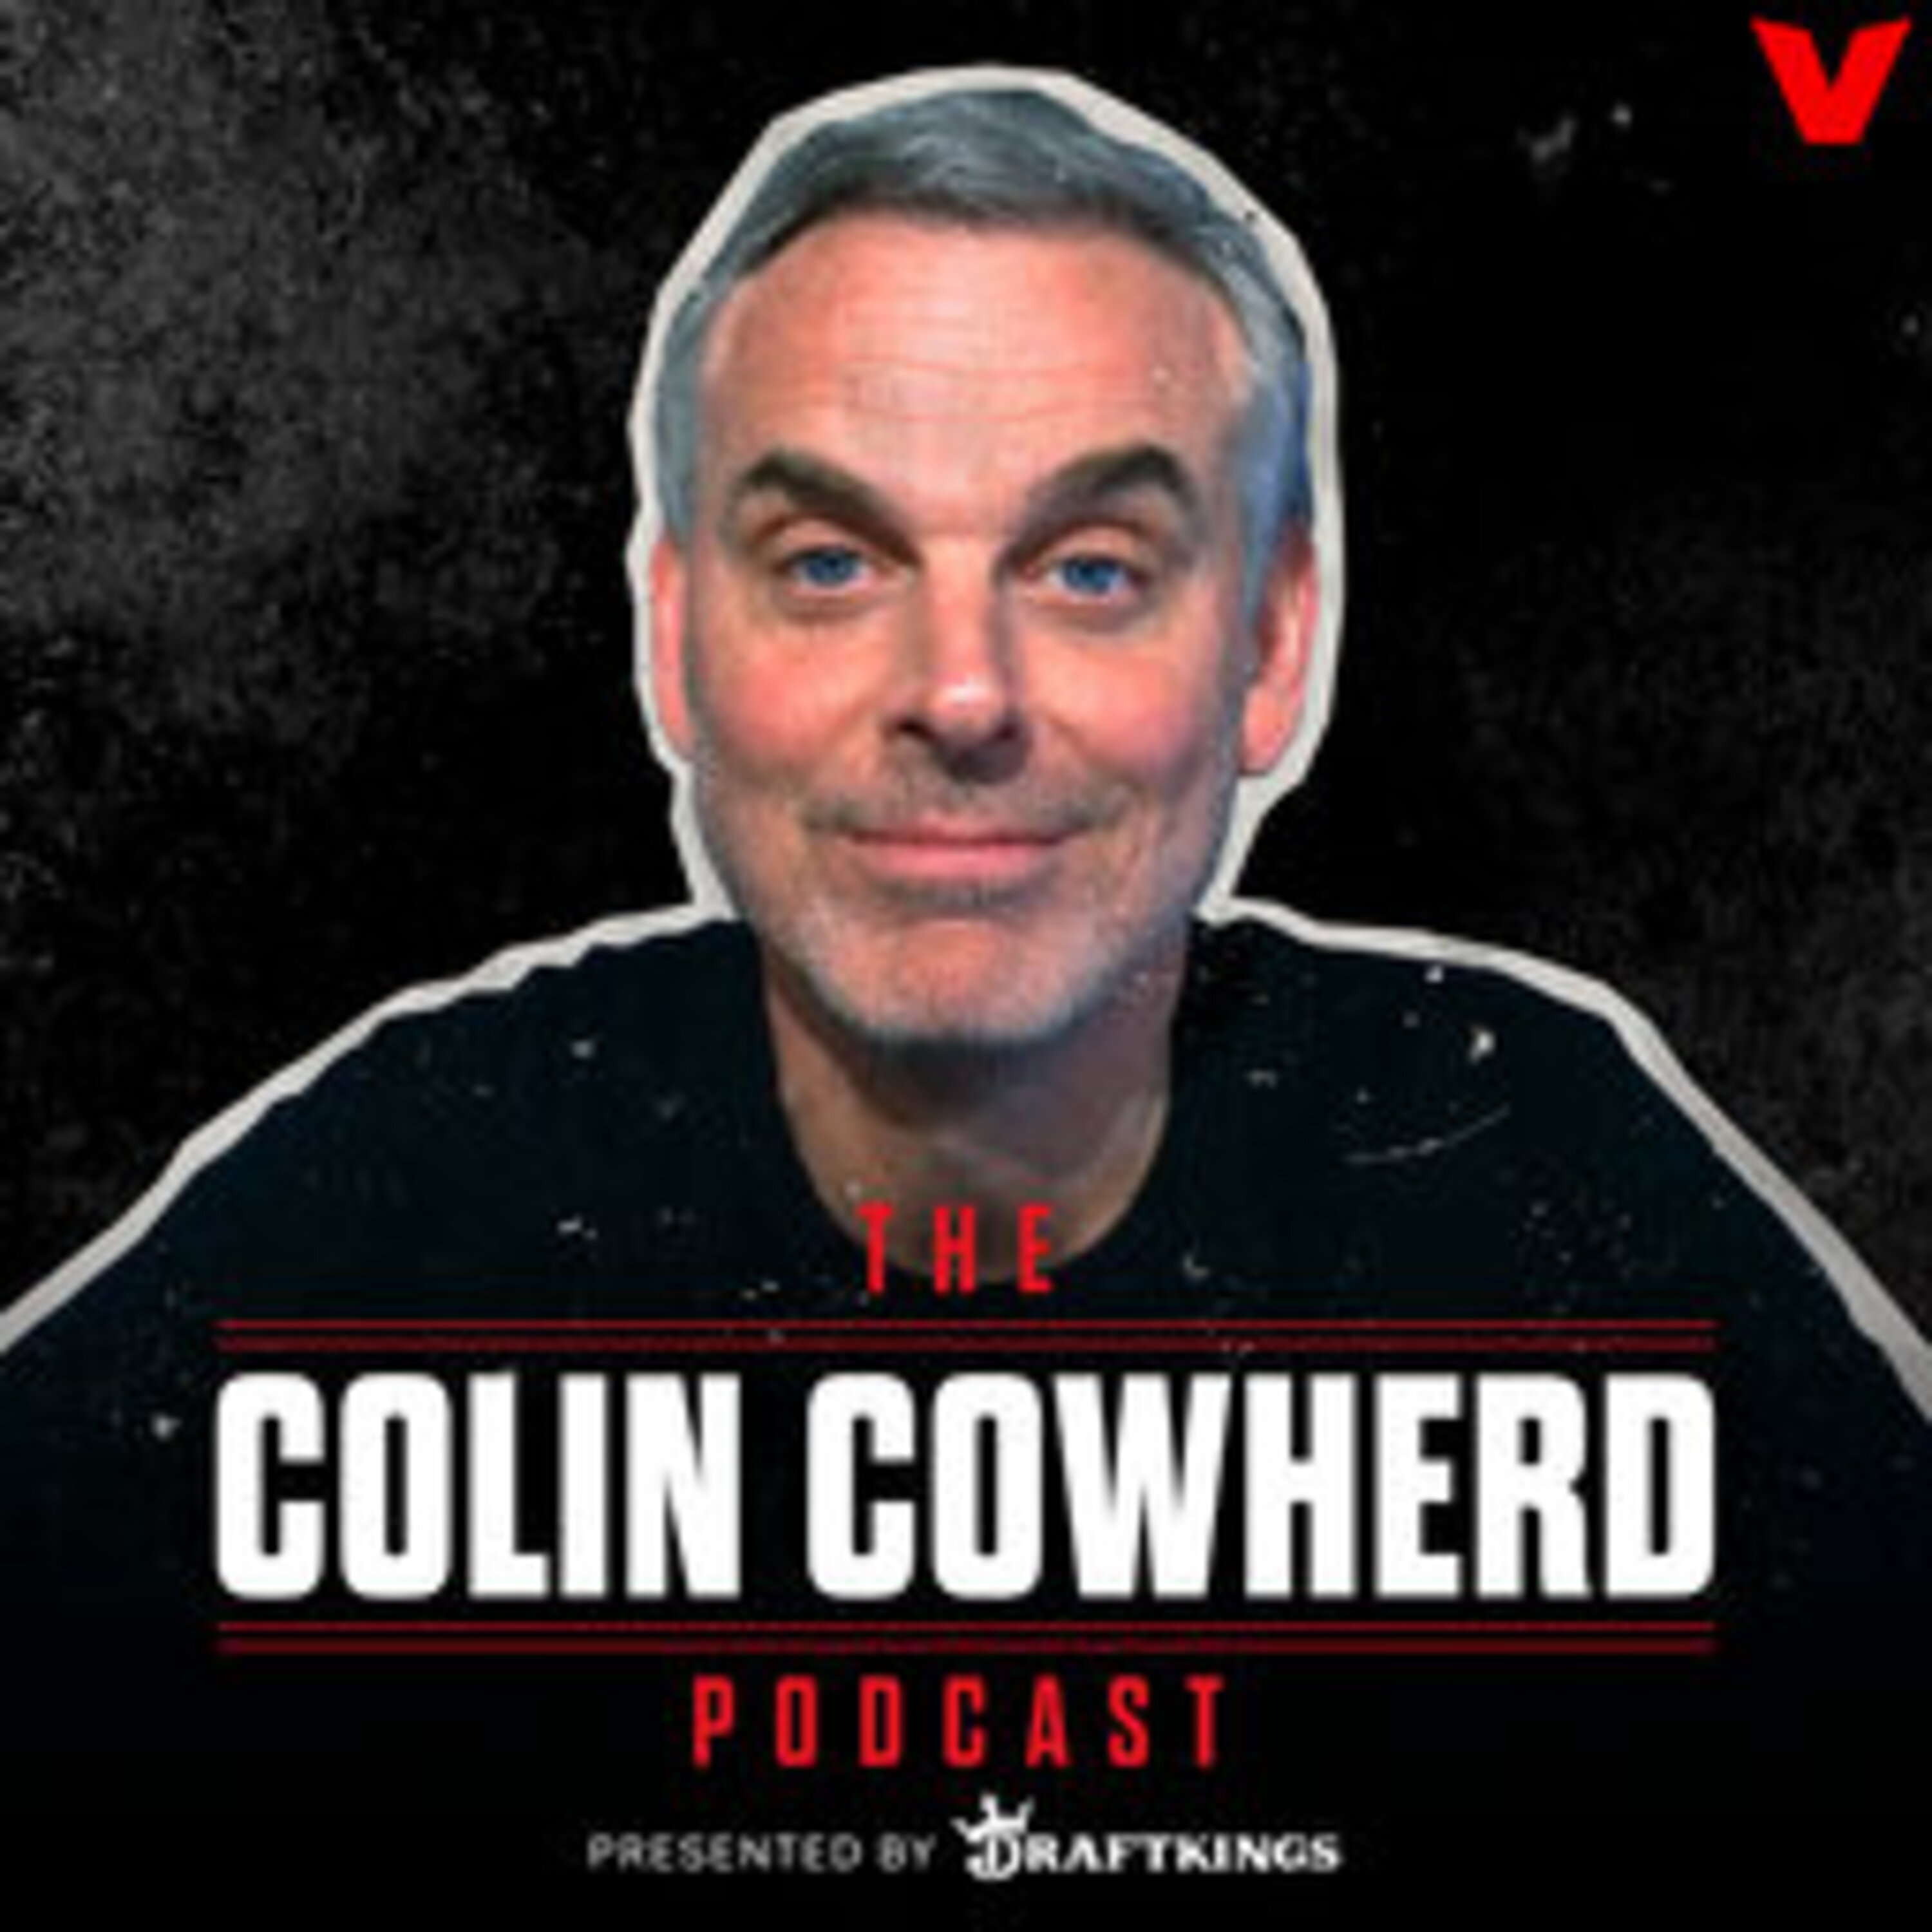 Colin Cowherd Podcast - NFL Win Totals, Jim Harbaugh’s Mind Games, Deion Sanders Hurting Shedeur? Bears A Wild Card Team?